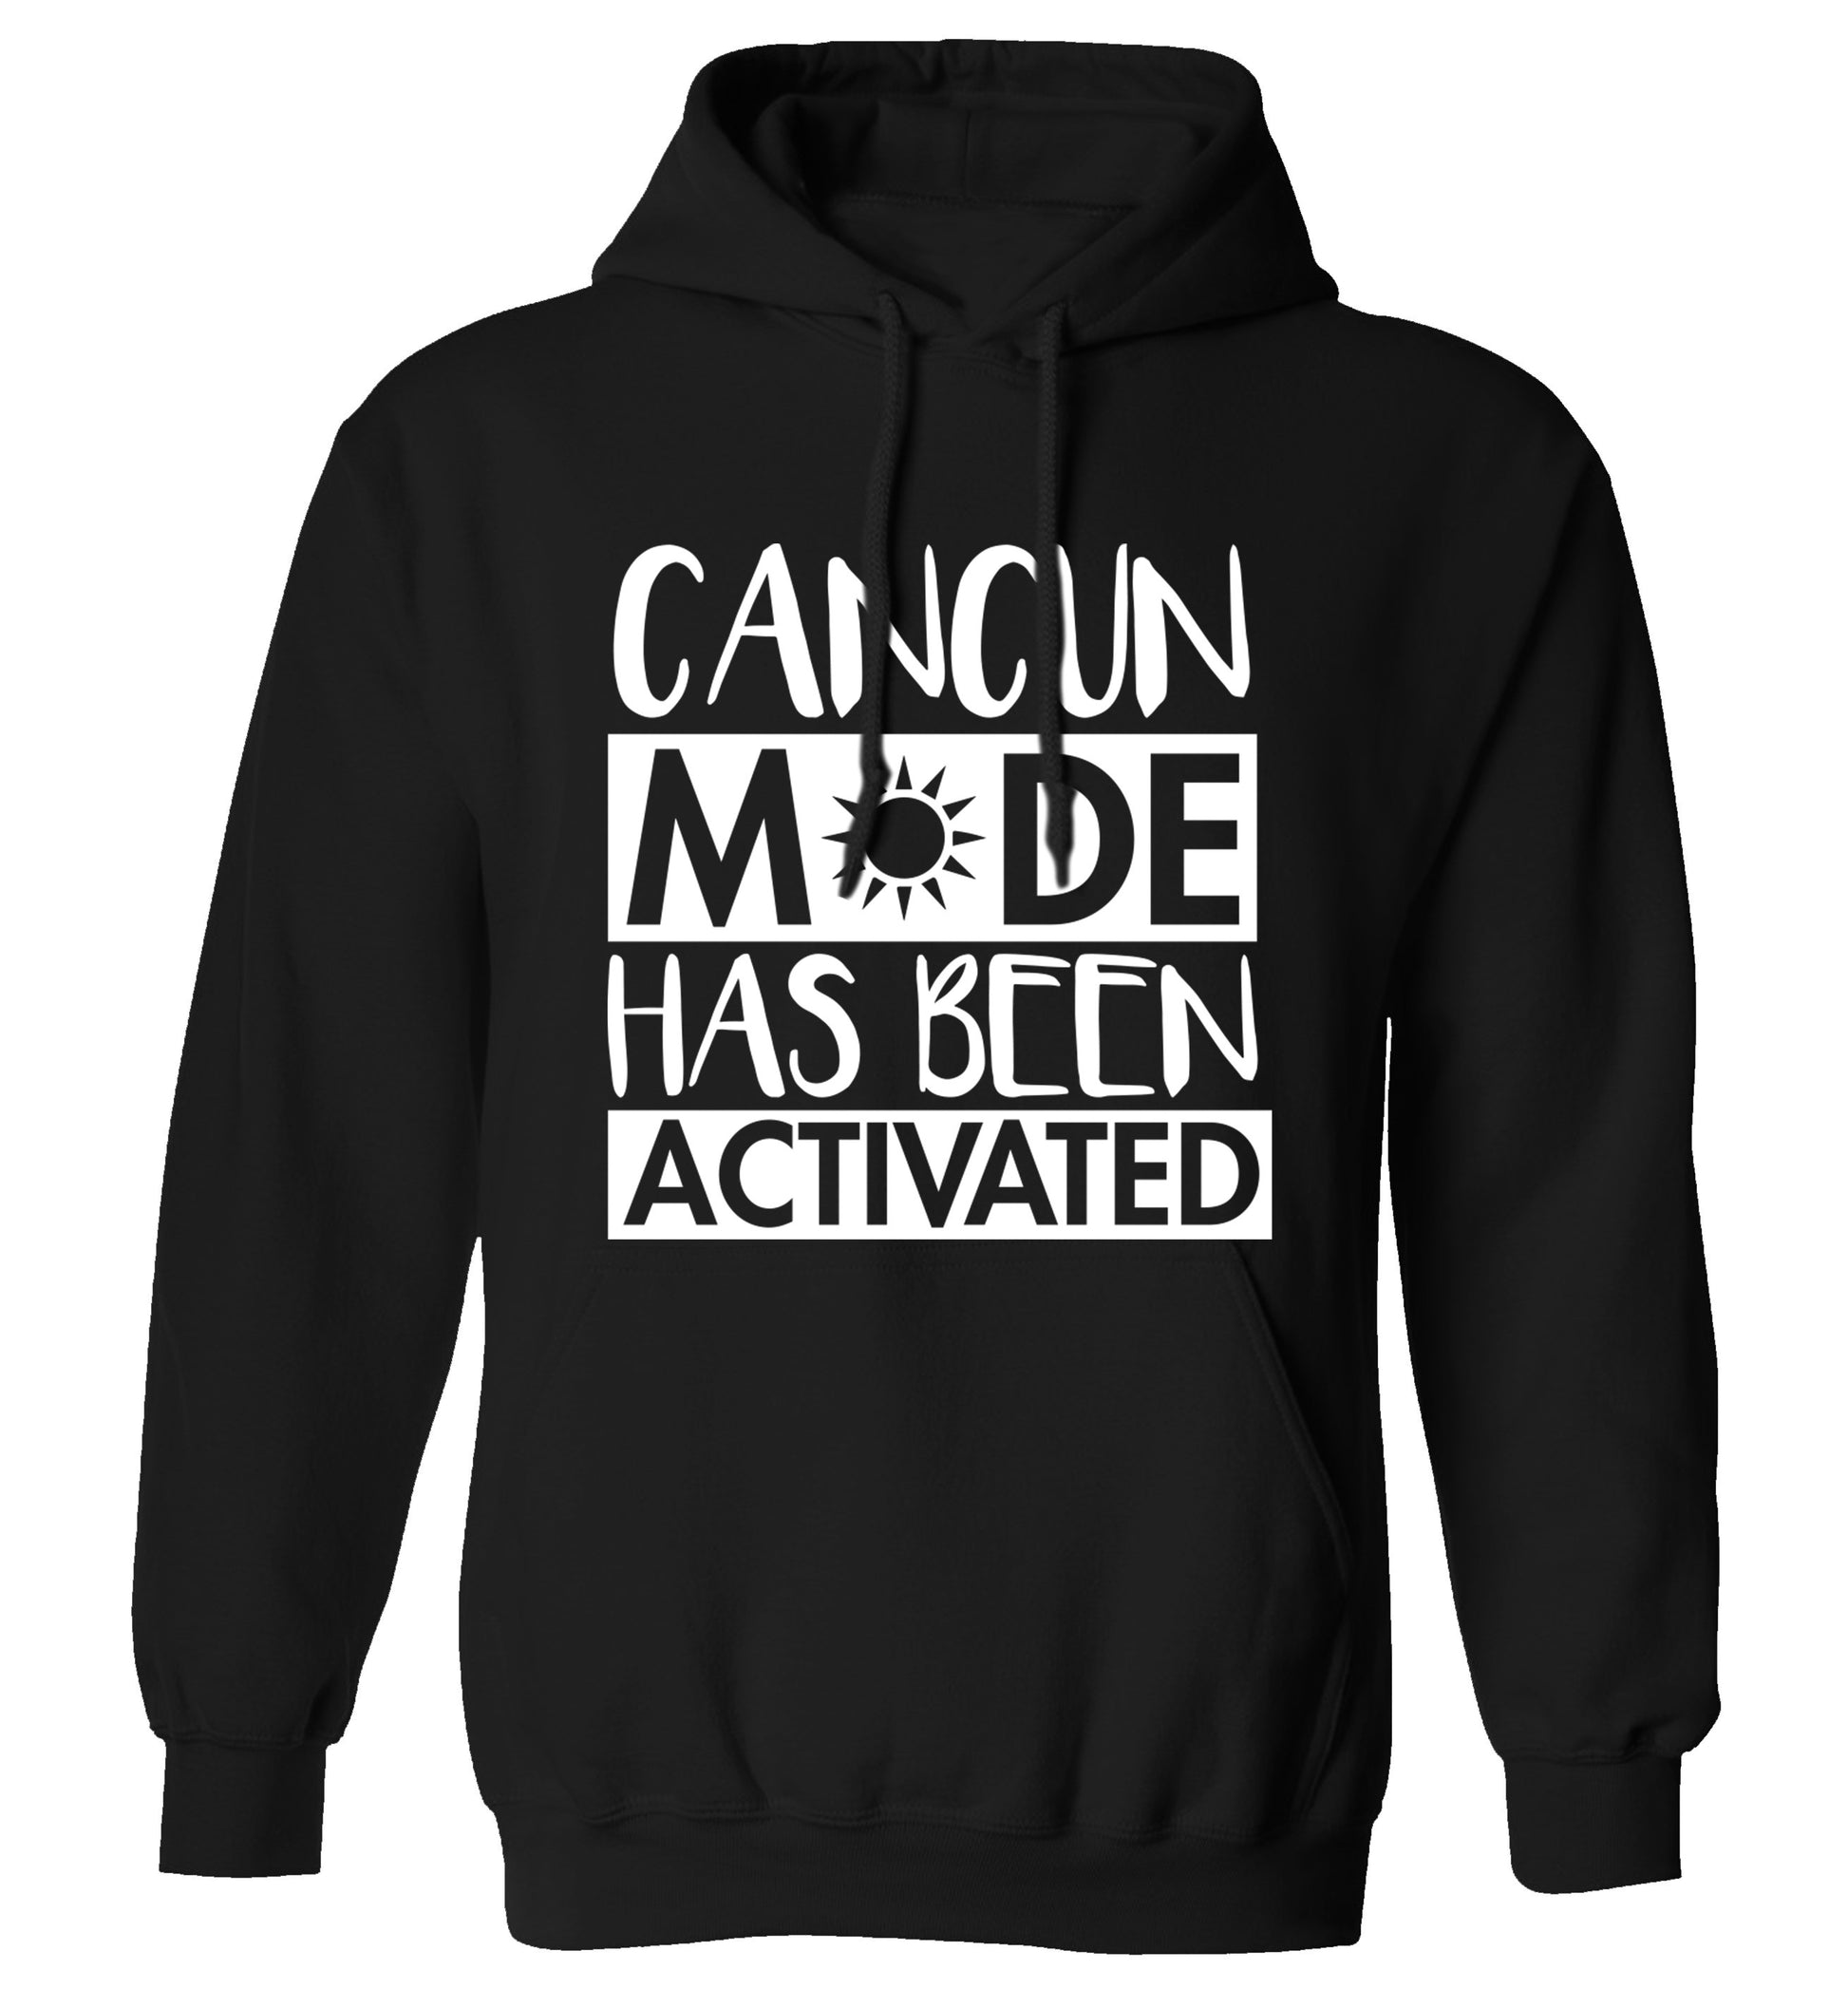 Cancun mode has been activated adults unisex black hoodie 2XL